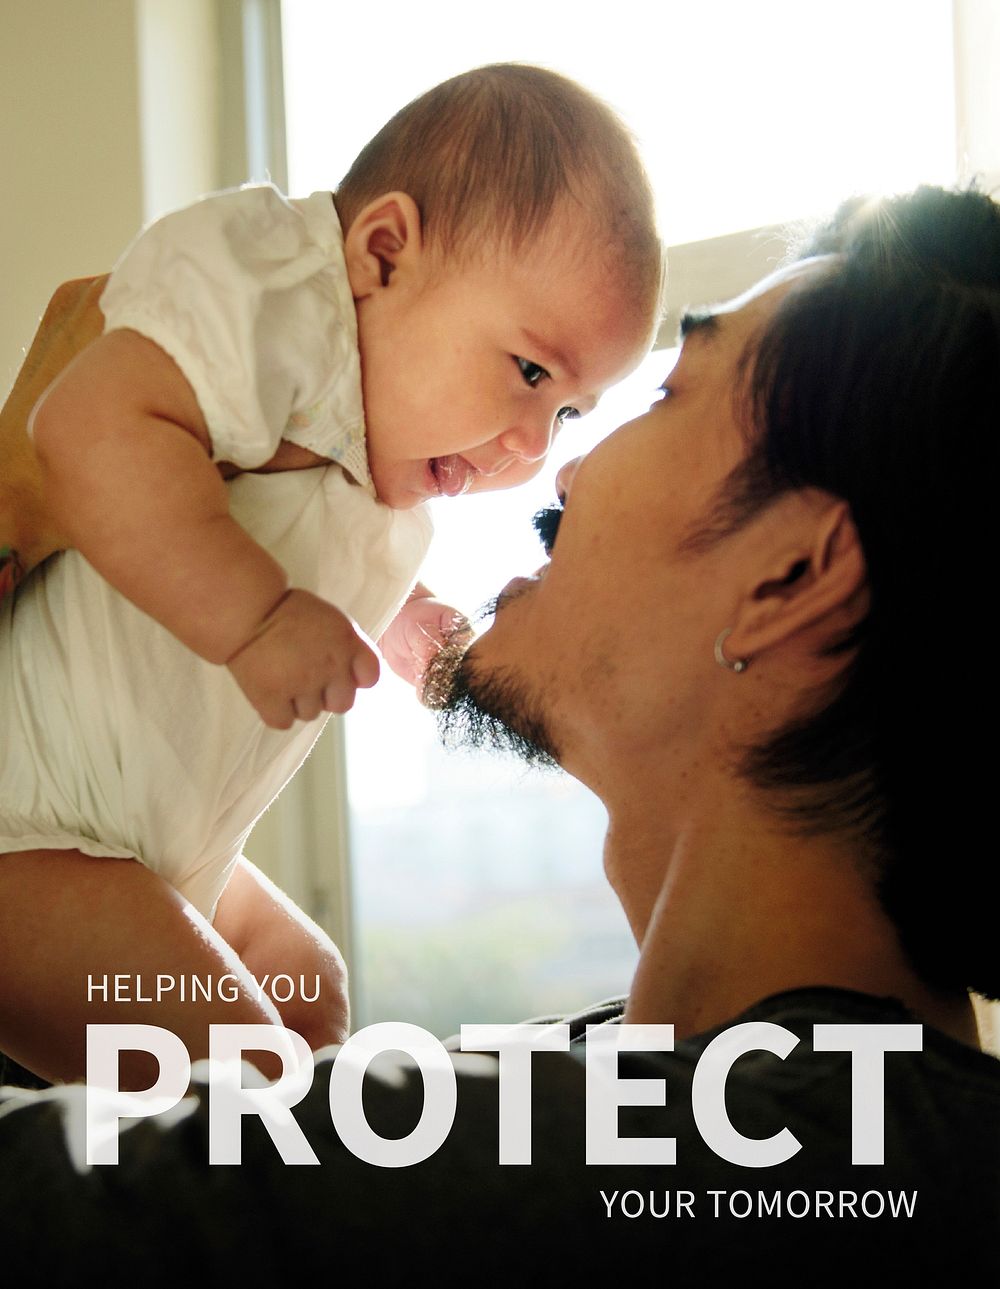 Protect tomorrow insurance template vector for family&rsquo;s health ad poster